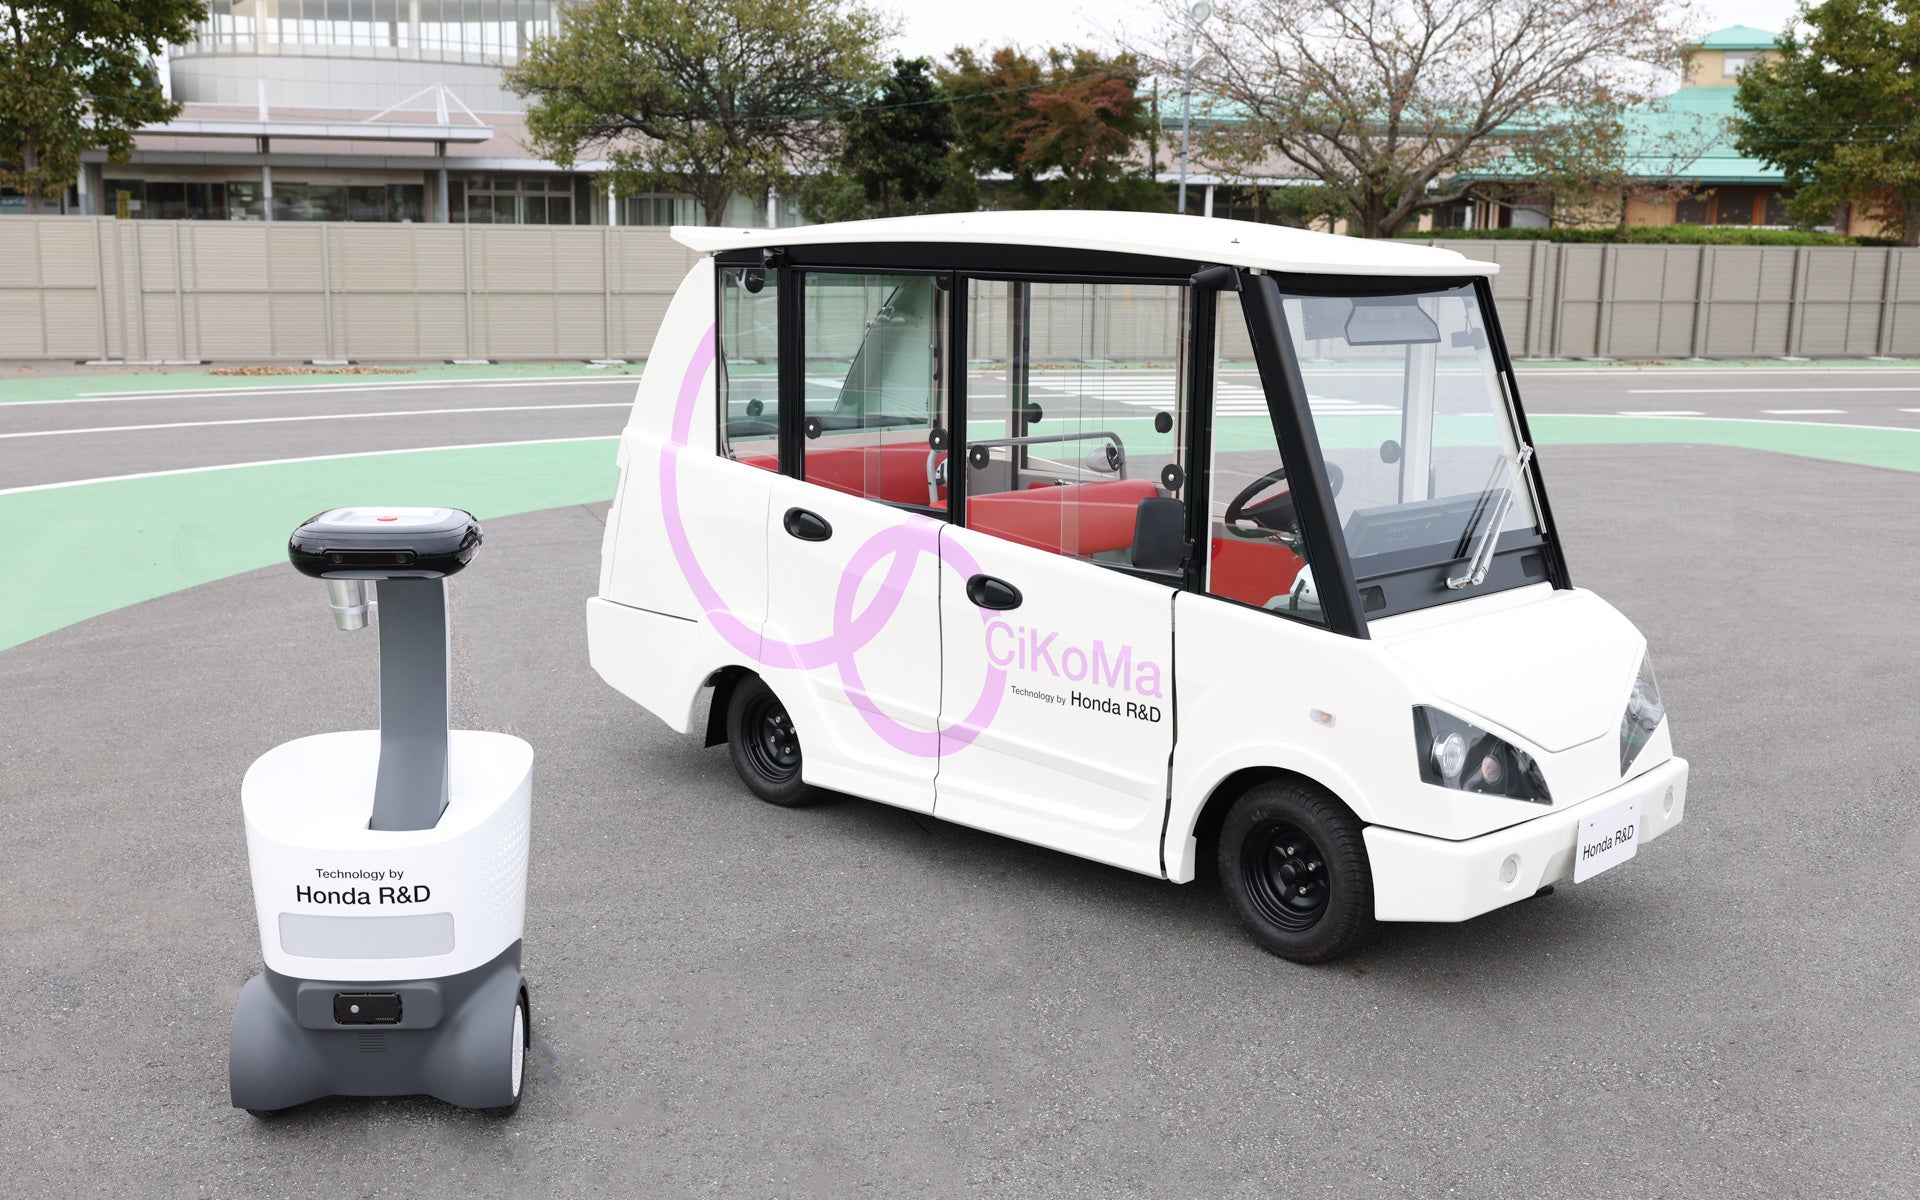 Honda Plans to Make Self-Driving Micro Cars for People Who Can’t or Won’t Drive